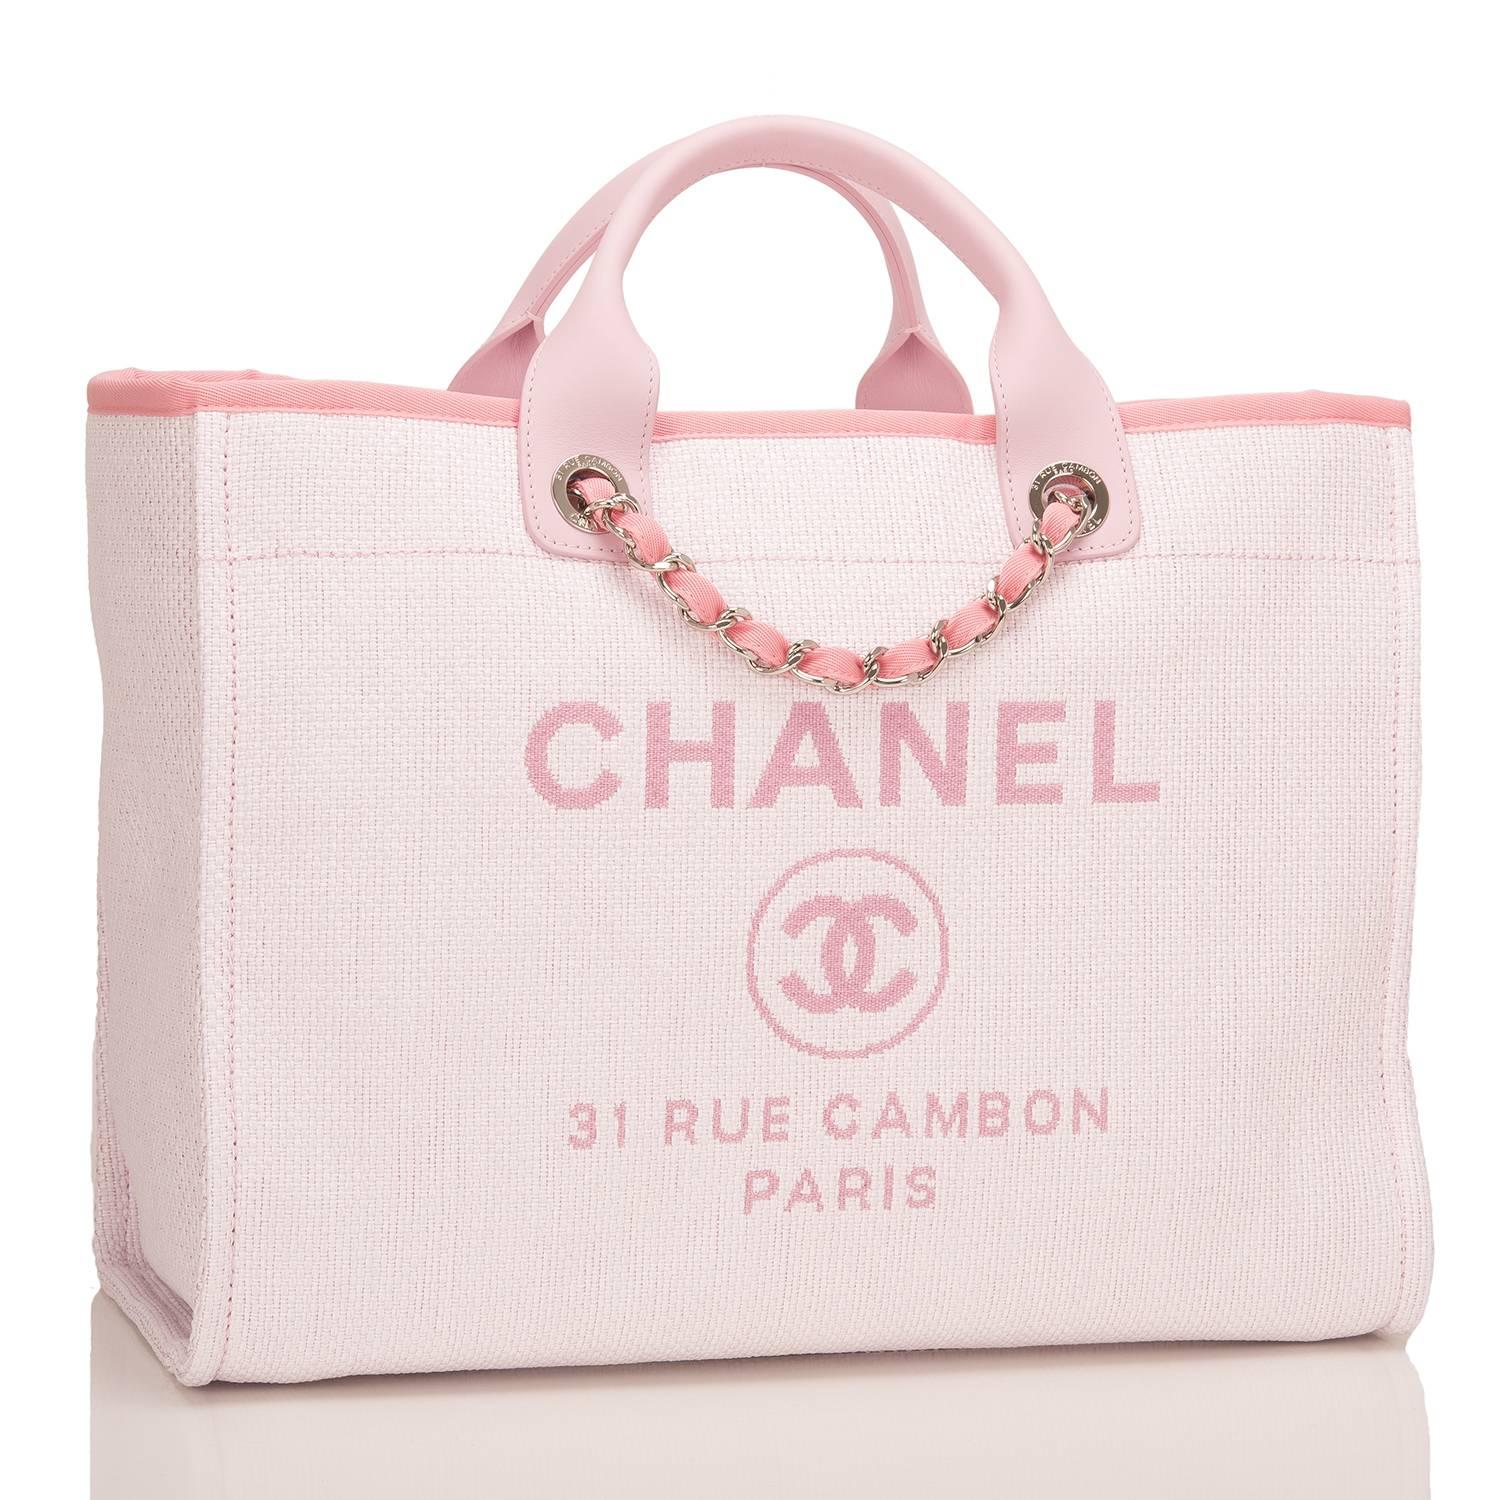 Chanel large Deauville shopping tote 30cm of pink canvas with silver tone hardware.

This bag features Chanel logos and the street name of Chanel's famous flagship store, 